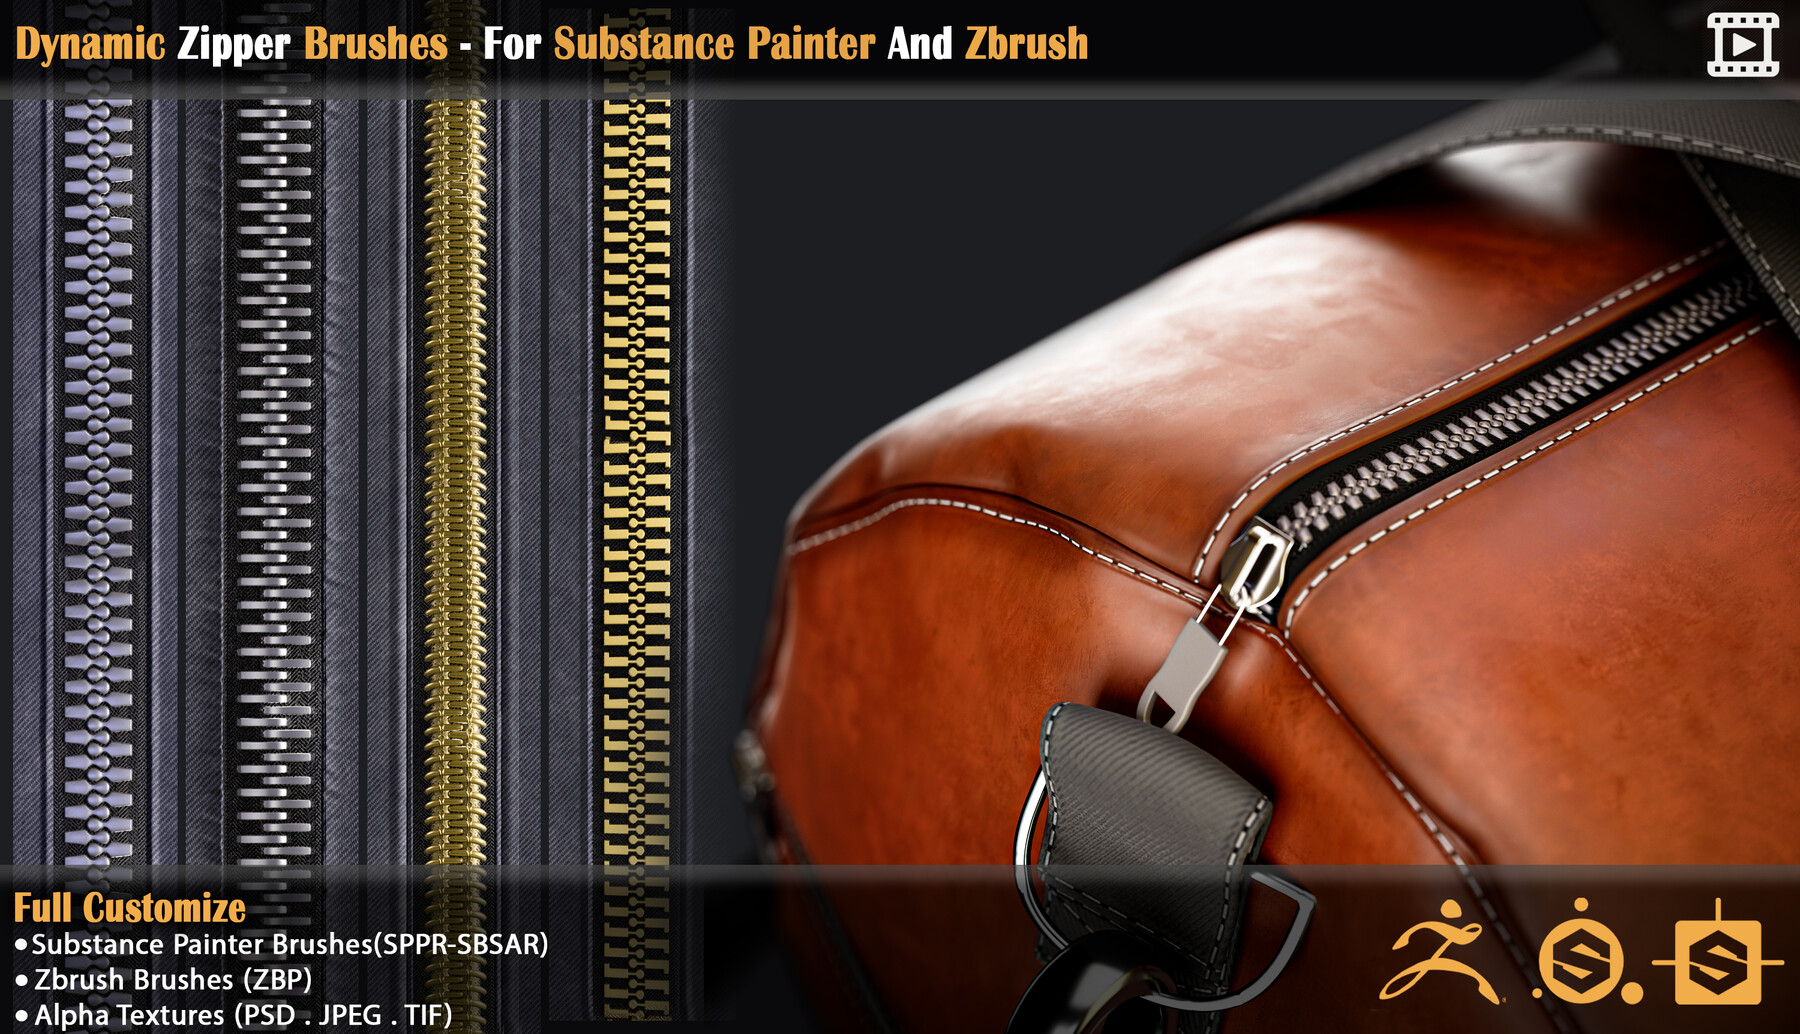 Dynamic Zipper Brushes - For Substance Painter And Zbrush